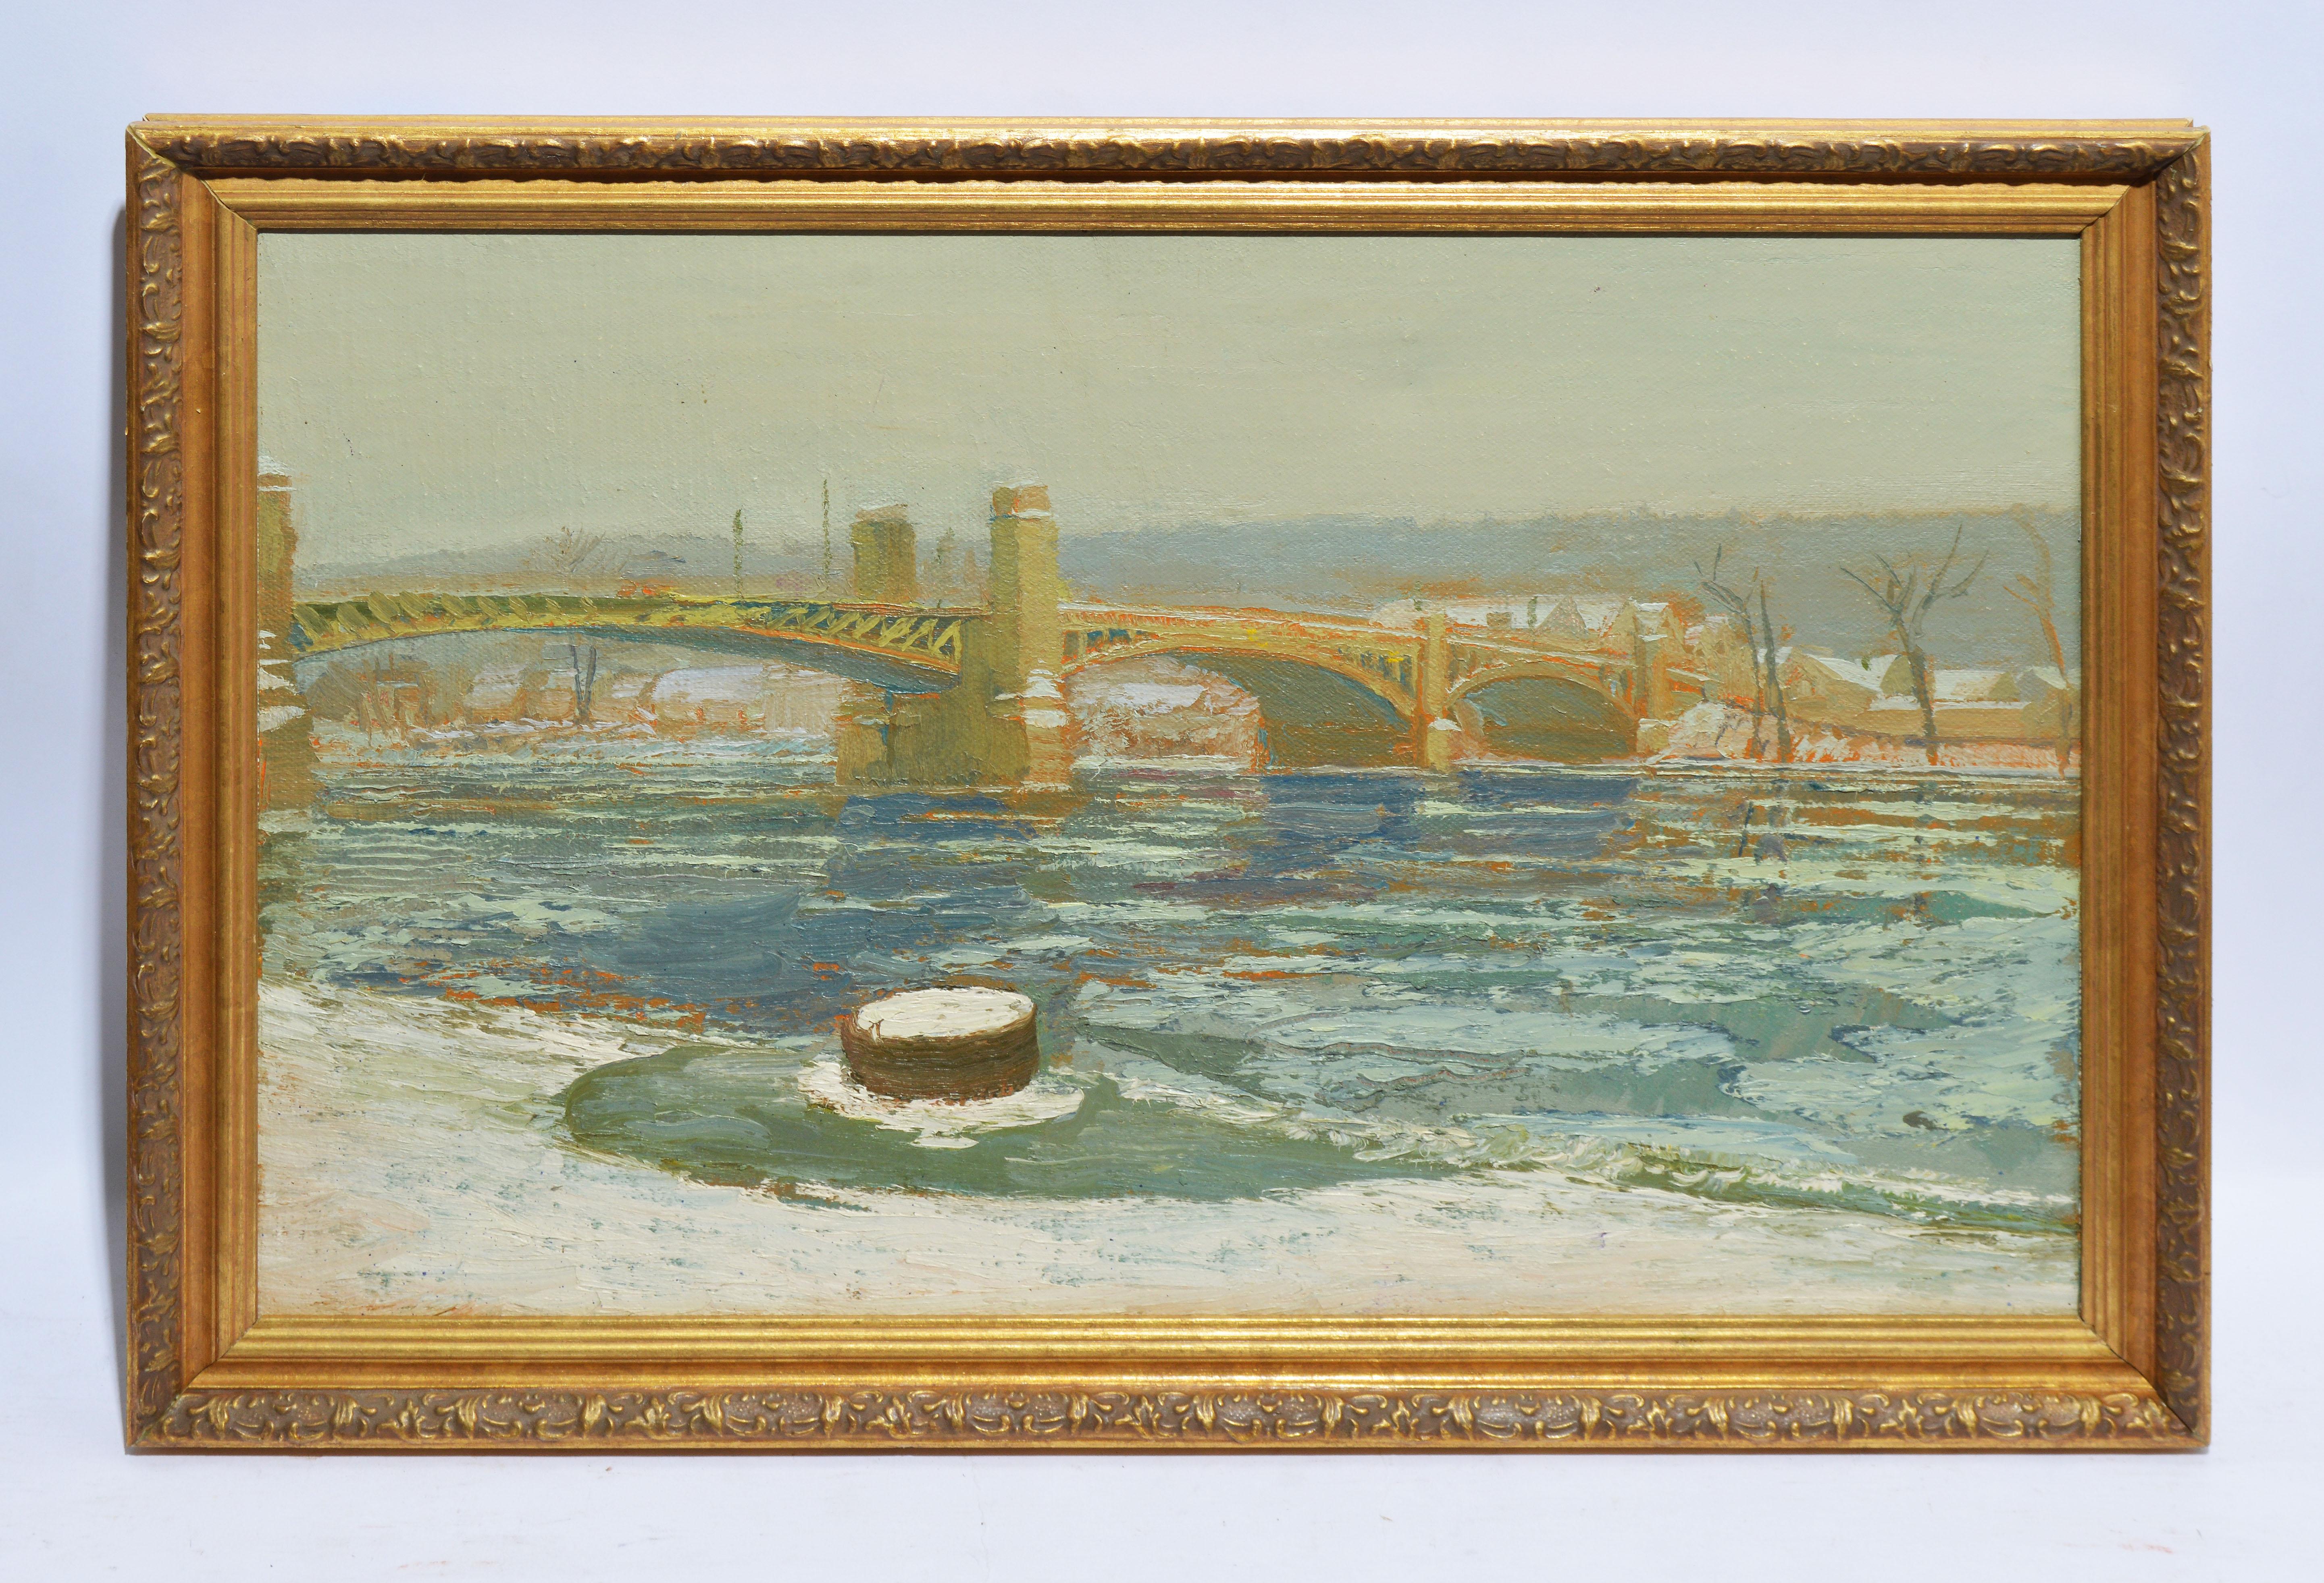 Winter Impressionist Landscape Oil Painting by Harry Orlyk, Green Island Bridge 1